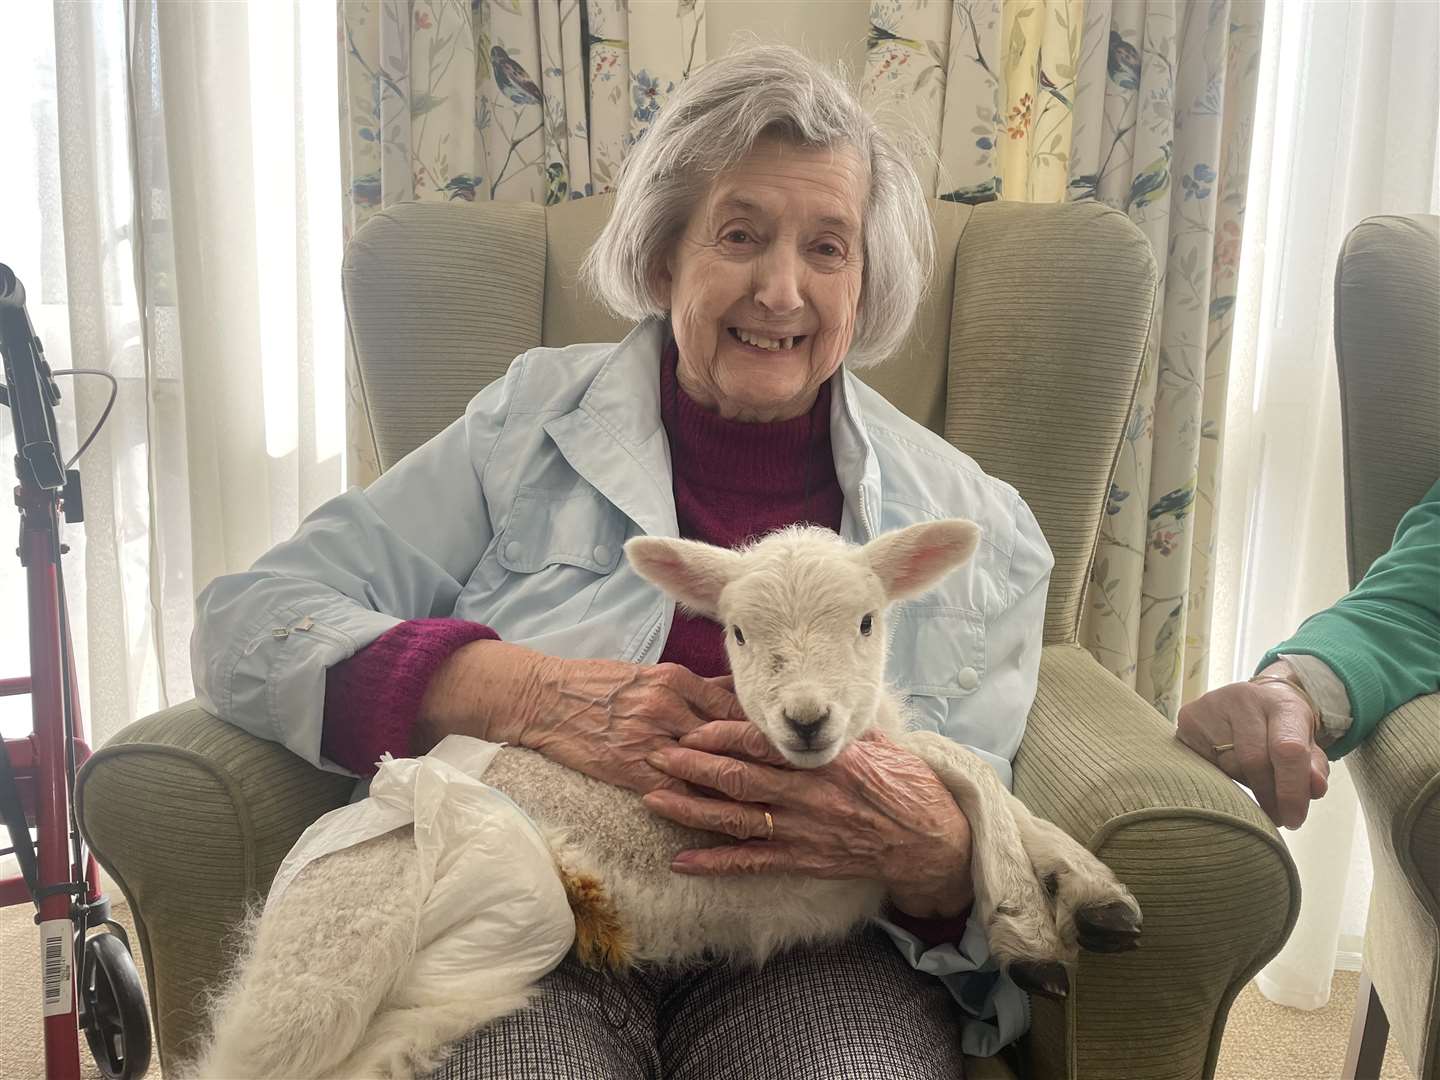 Shelia cuddling a lamb at the Whitstable care home. Picture: Harrier Lodge